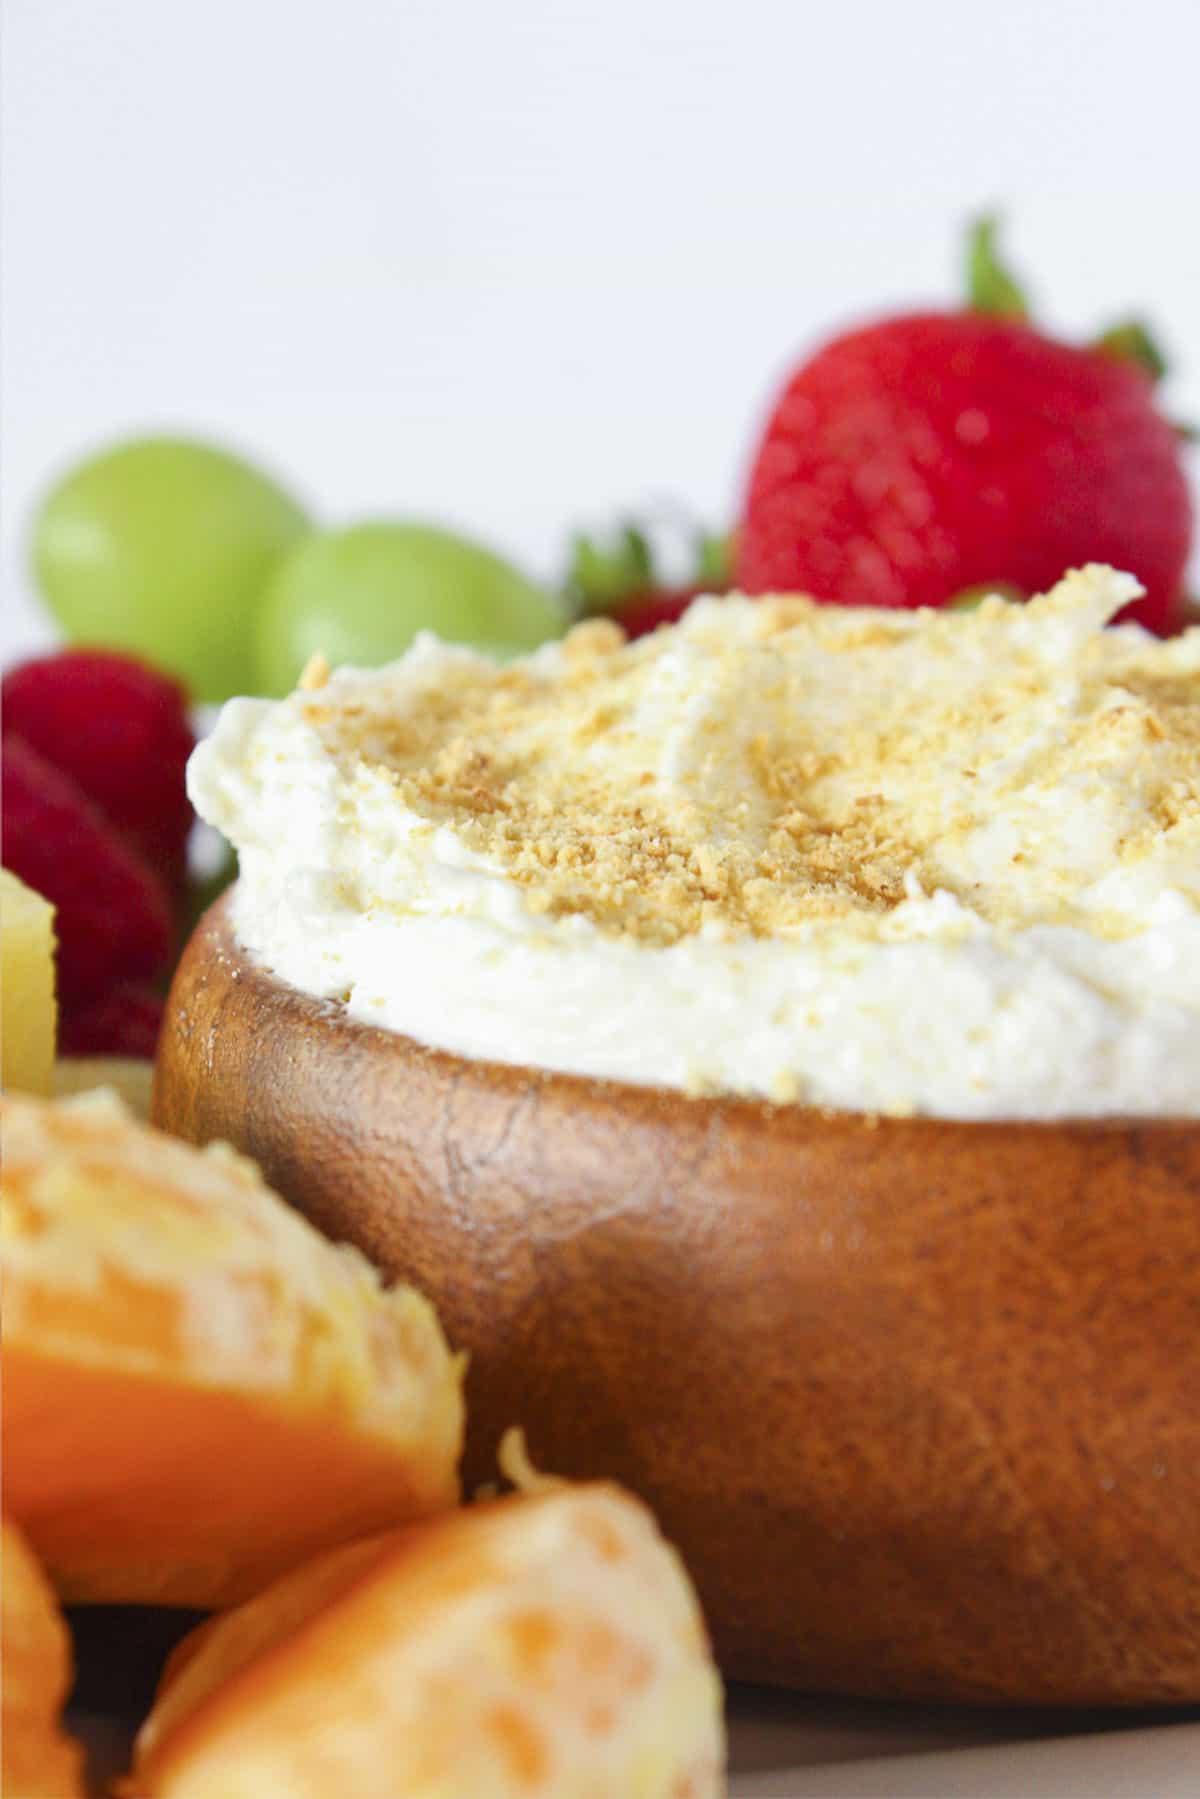 Cheesecake dip for fruit in a bowl and surrounded by fresh fruit.